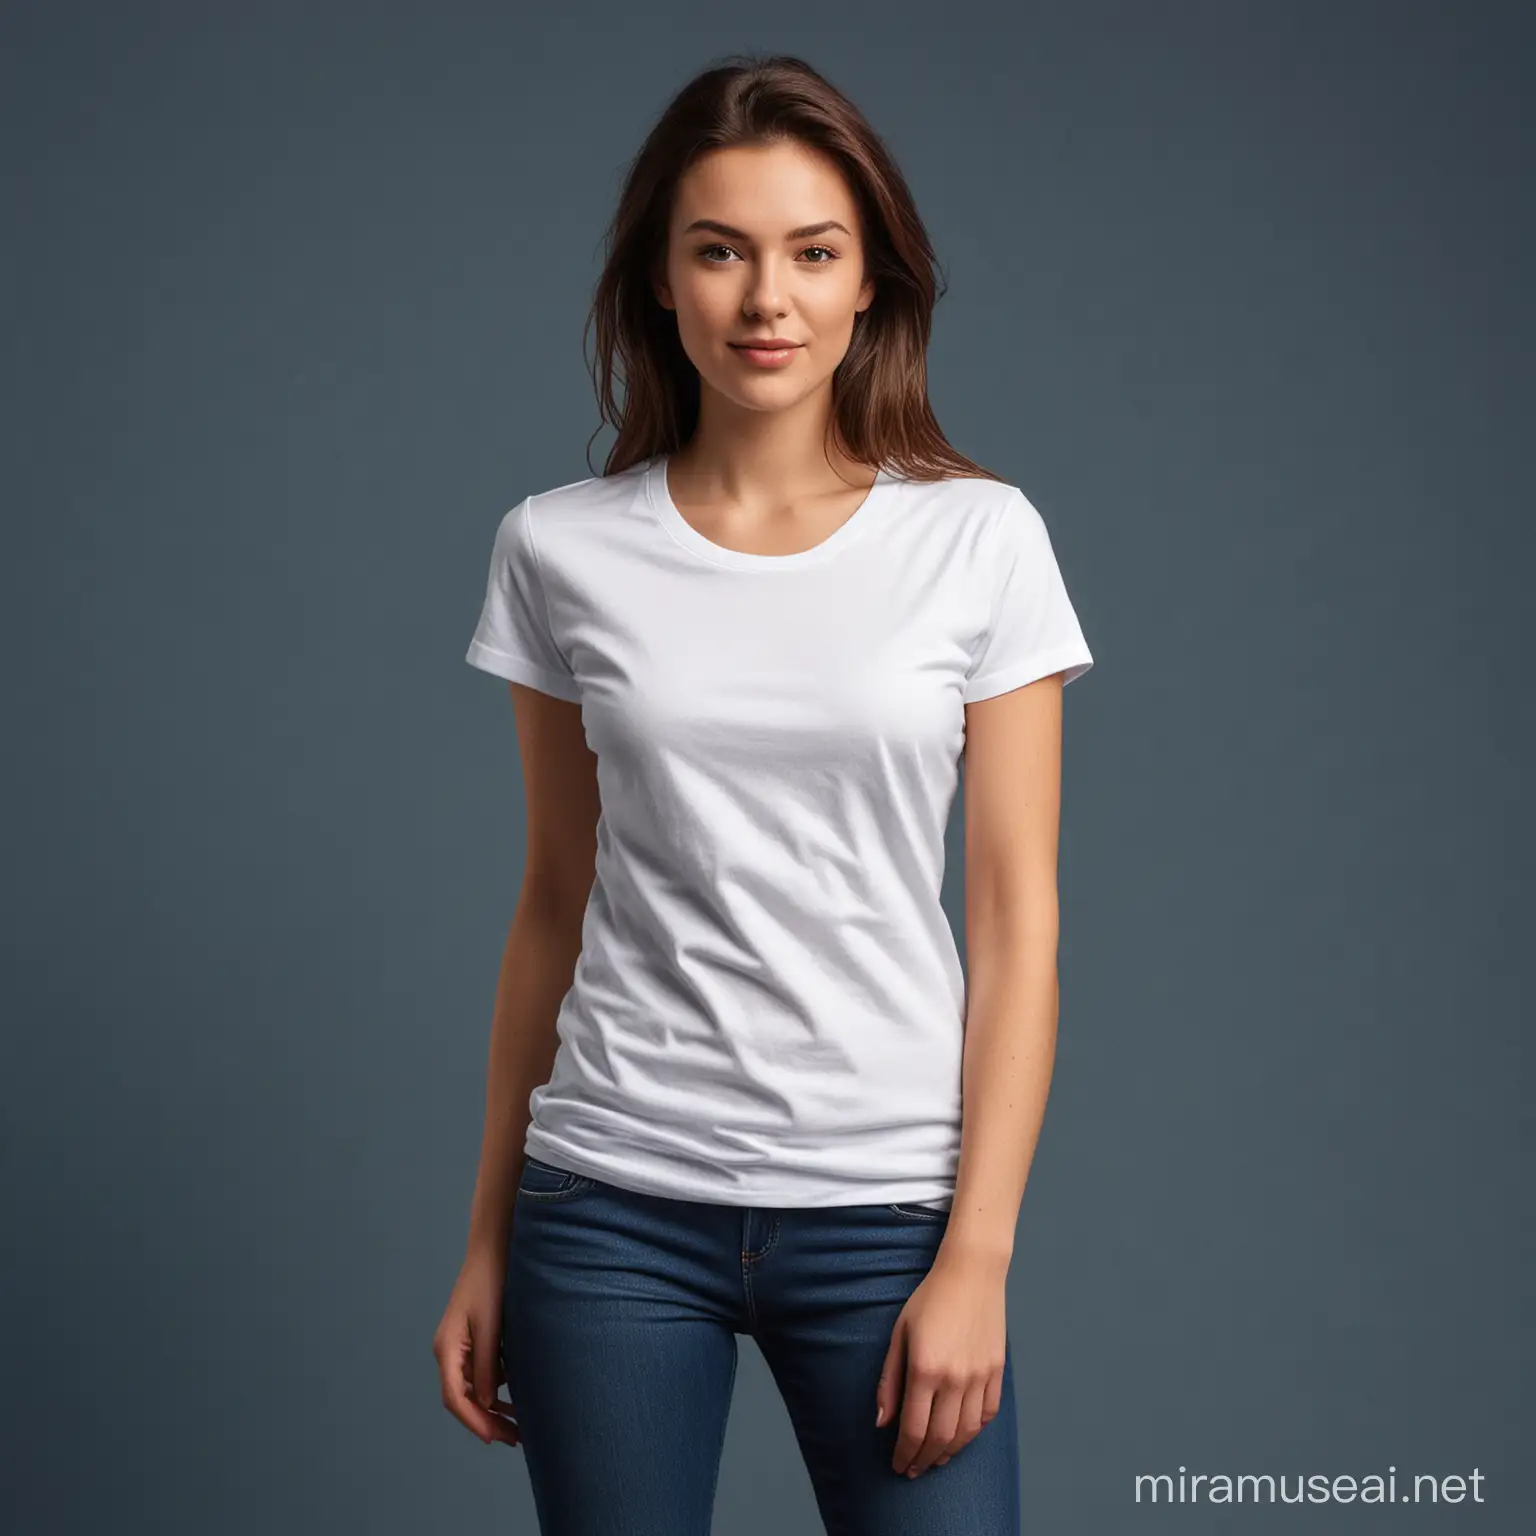 create for me a female model wearing a white T-shirt without prints, with a navy background.